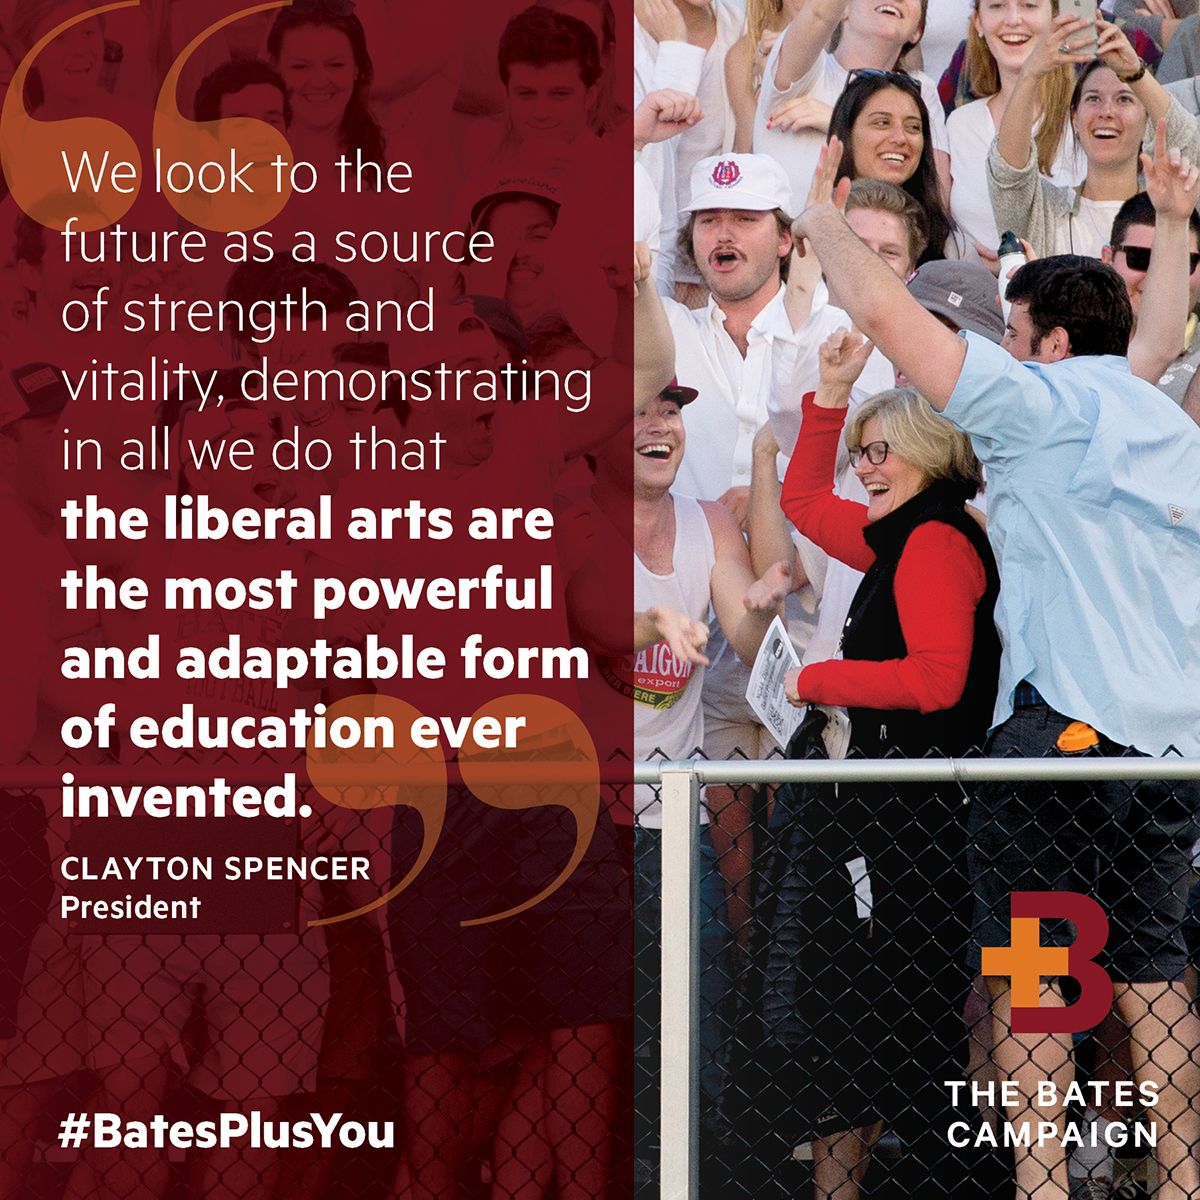 Celebrate the launch of The Bates Campaign and show your support by sharing #BatesPlusYou images and video on social media!